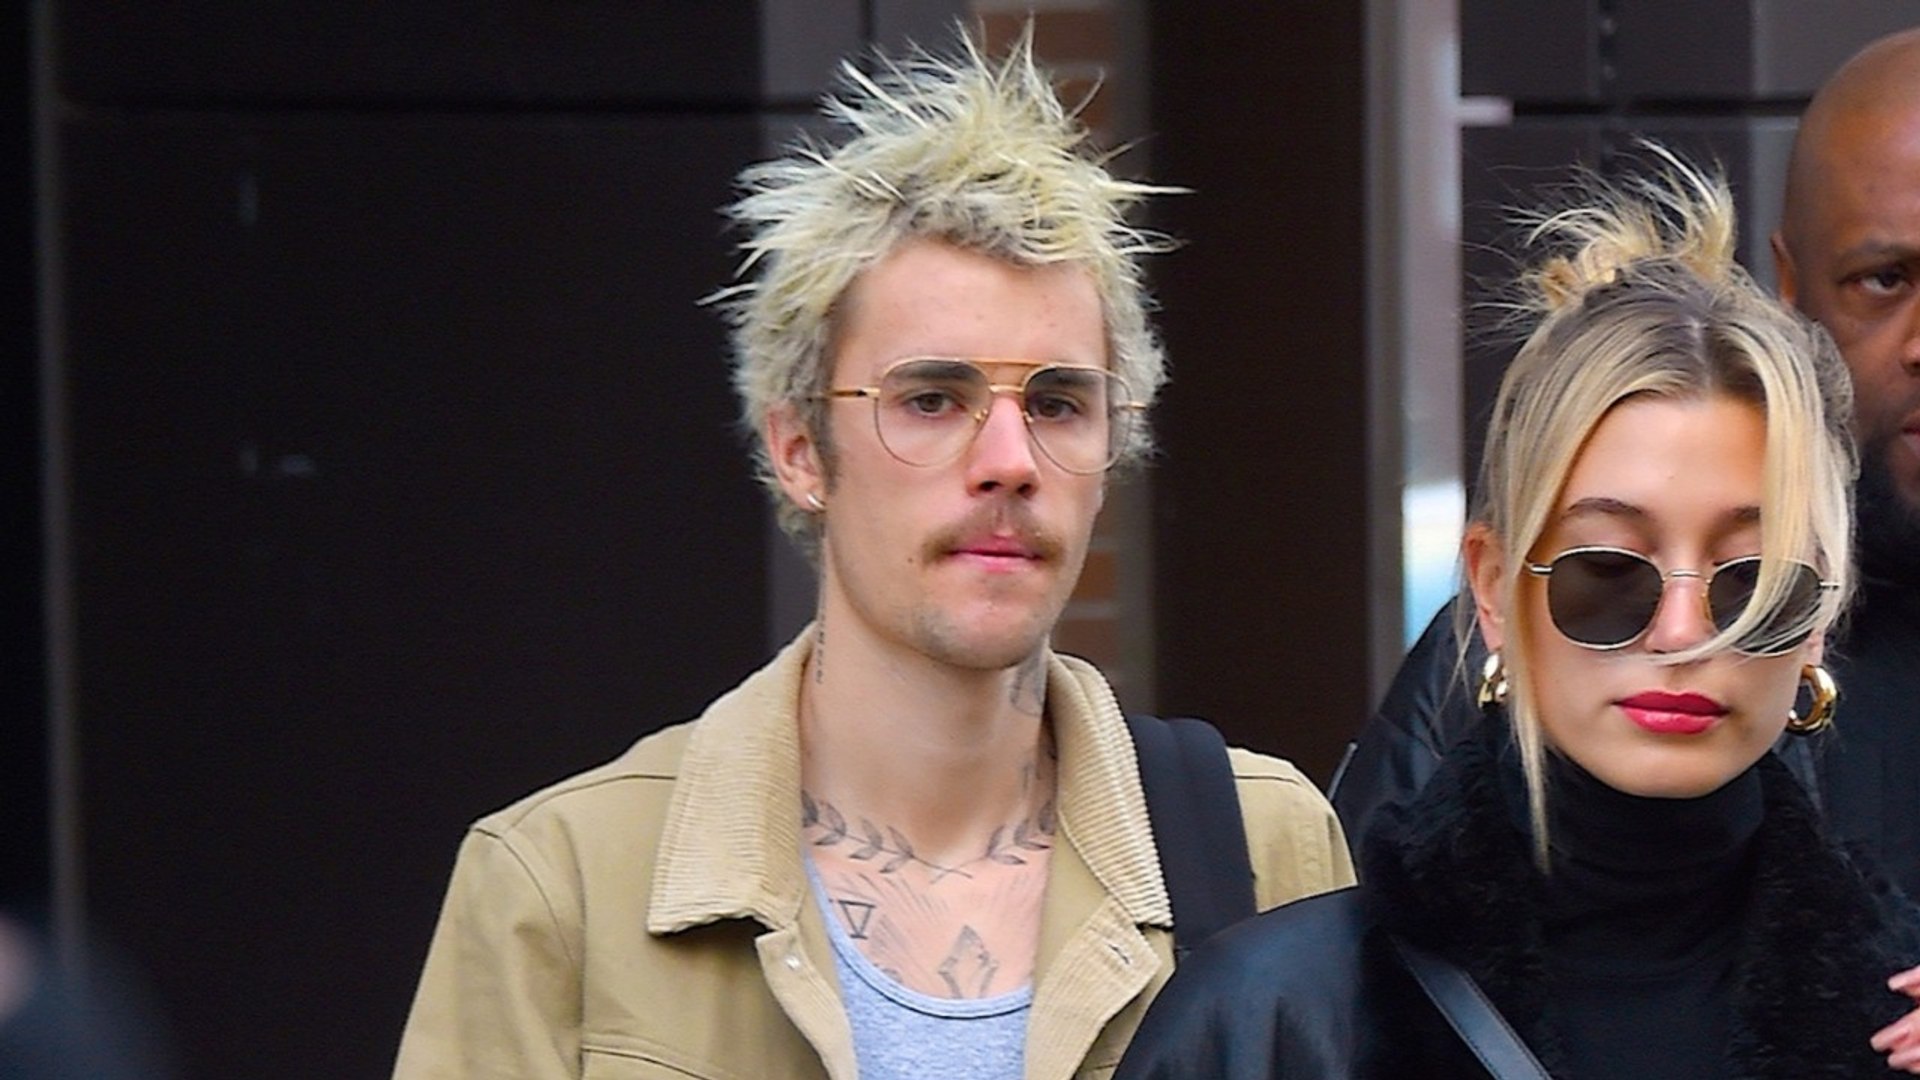 ⁣Justin Bieber Cries, Wants To 'Protect' Billie Eilish From Industry